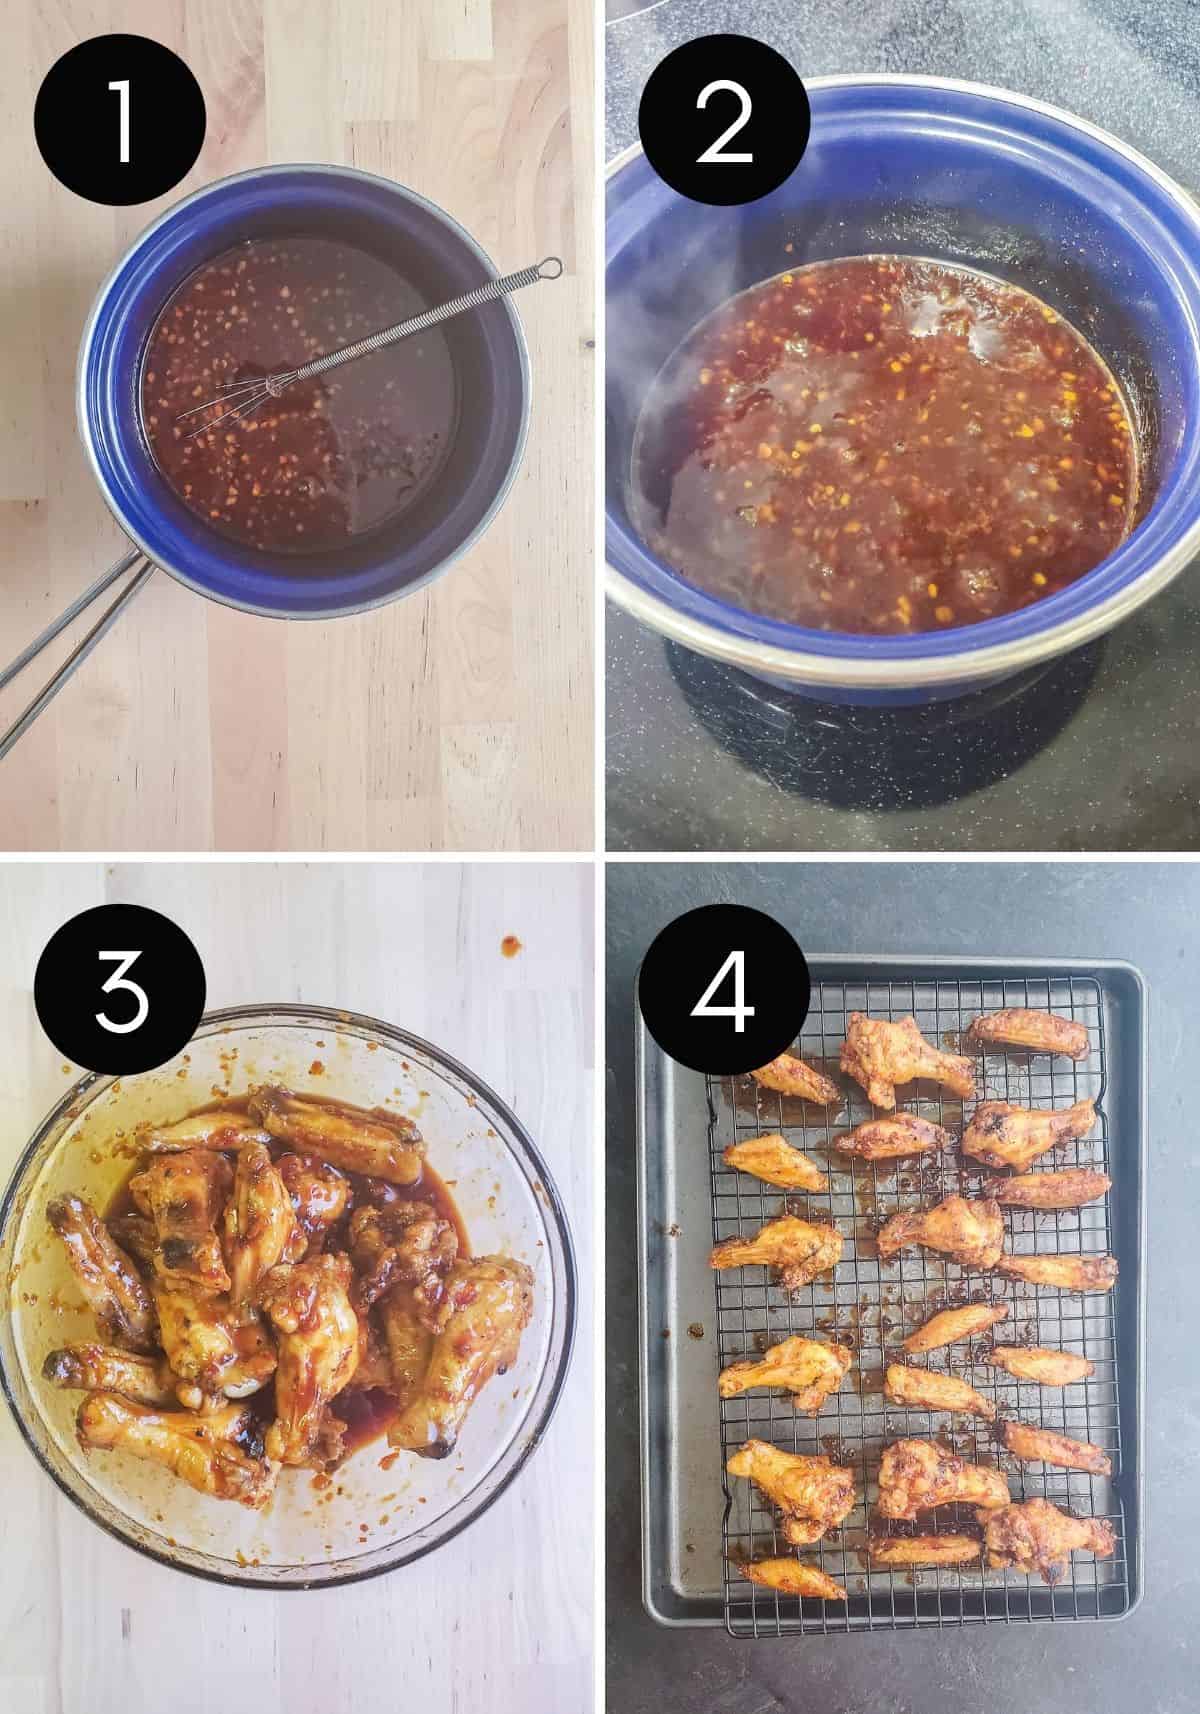 Prep image for wing recipe showing four image collage of sauce being made then wings being coated in sauce.